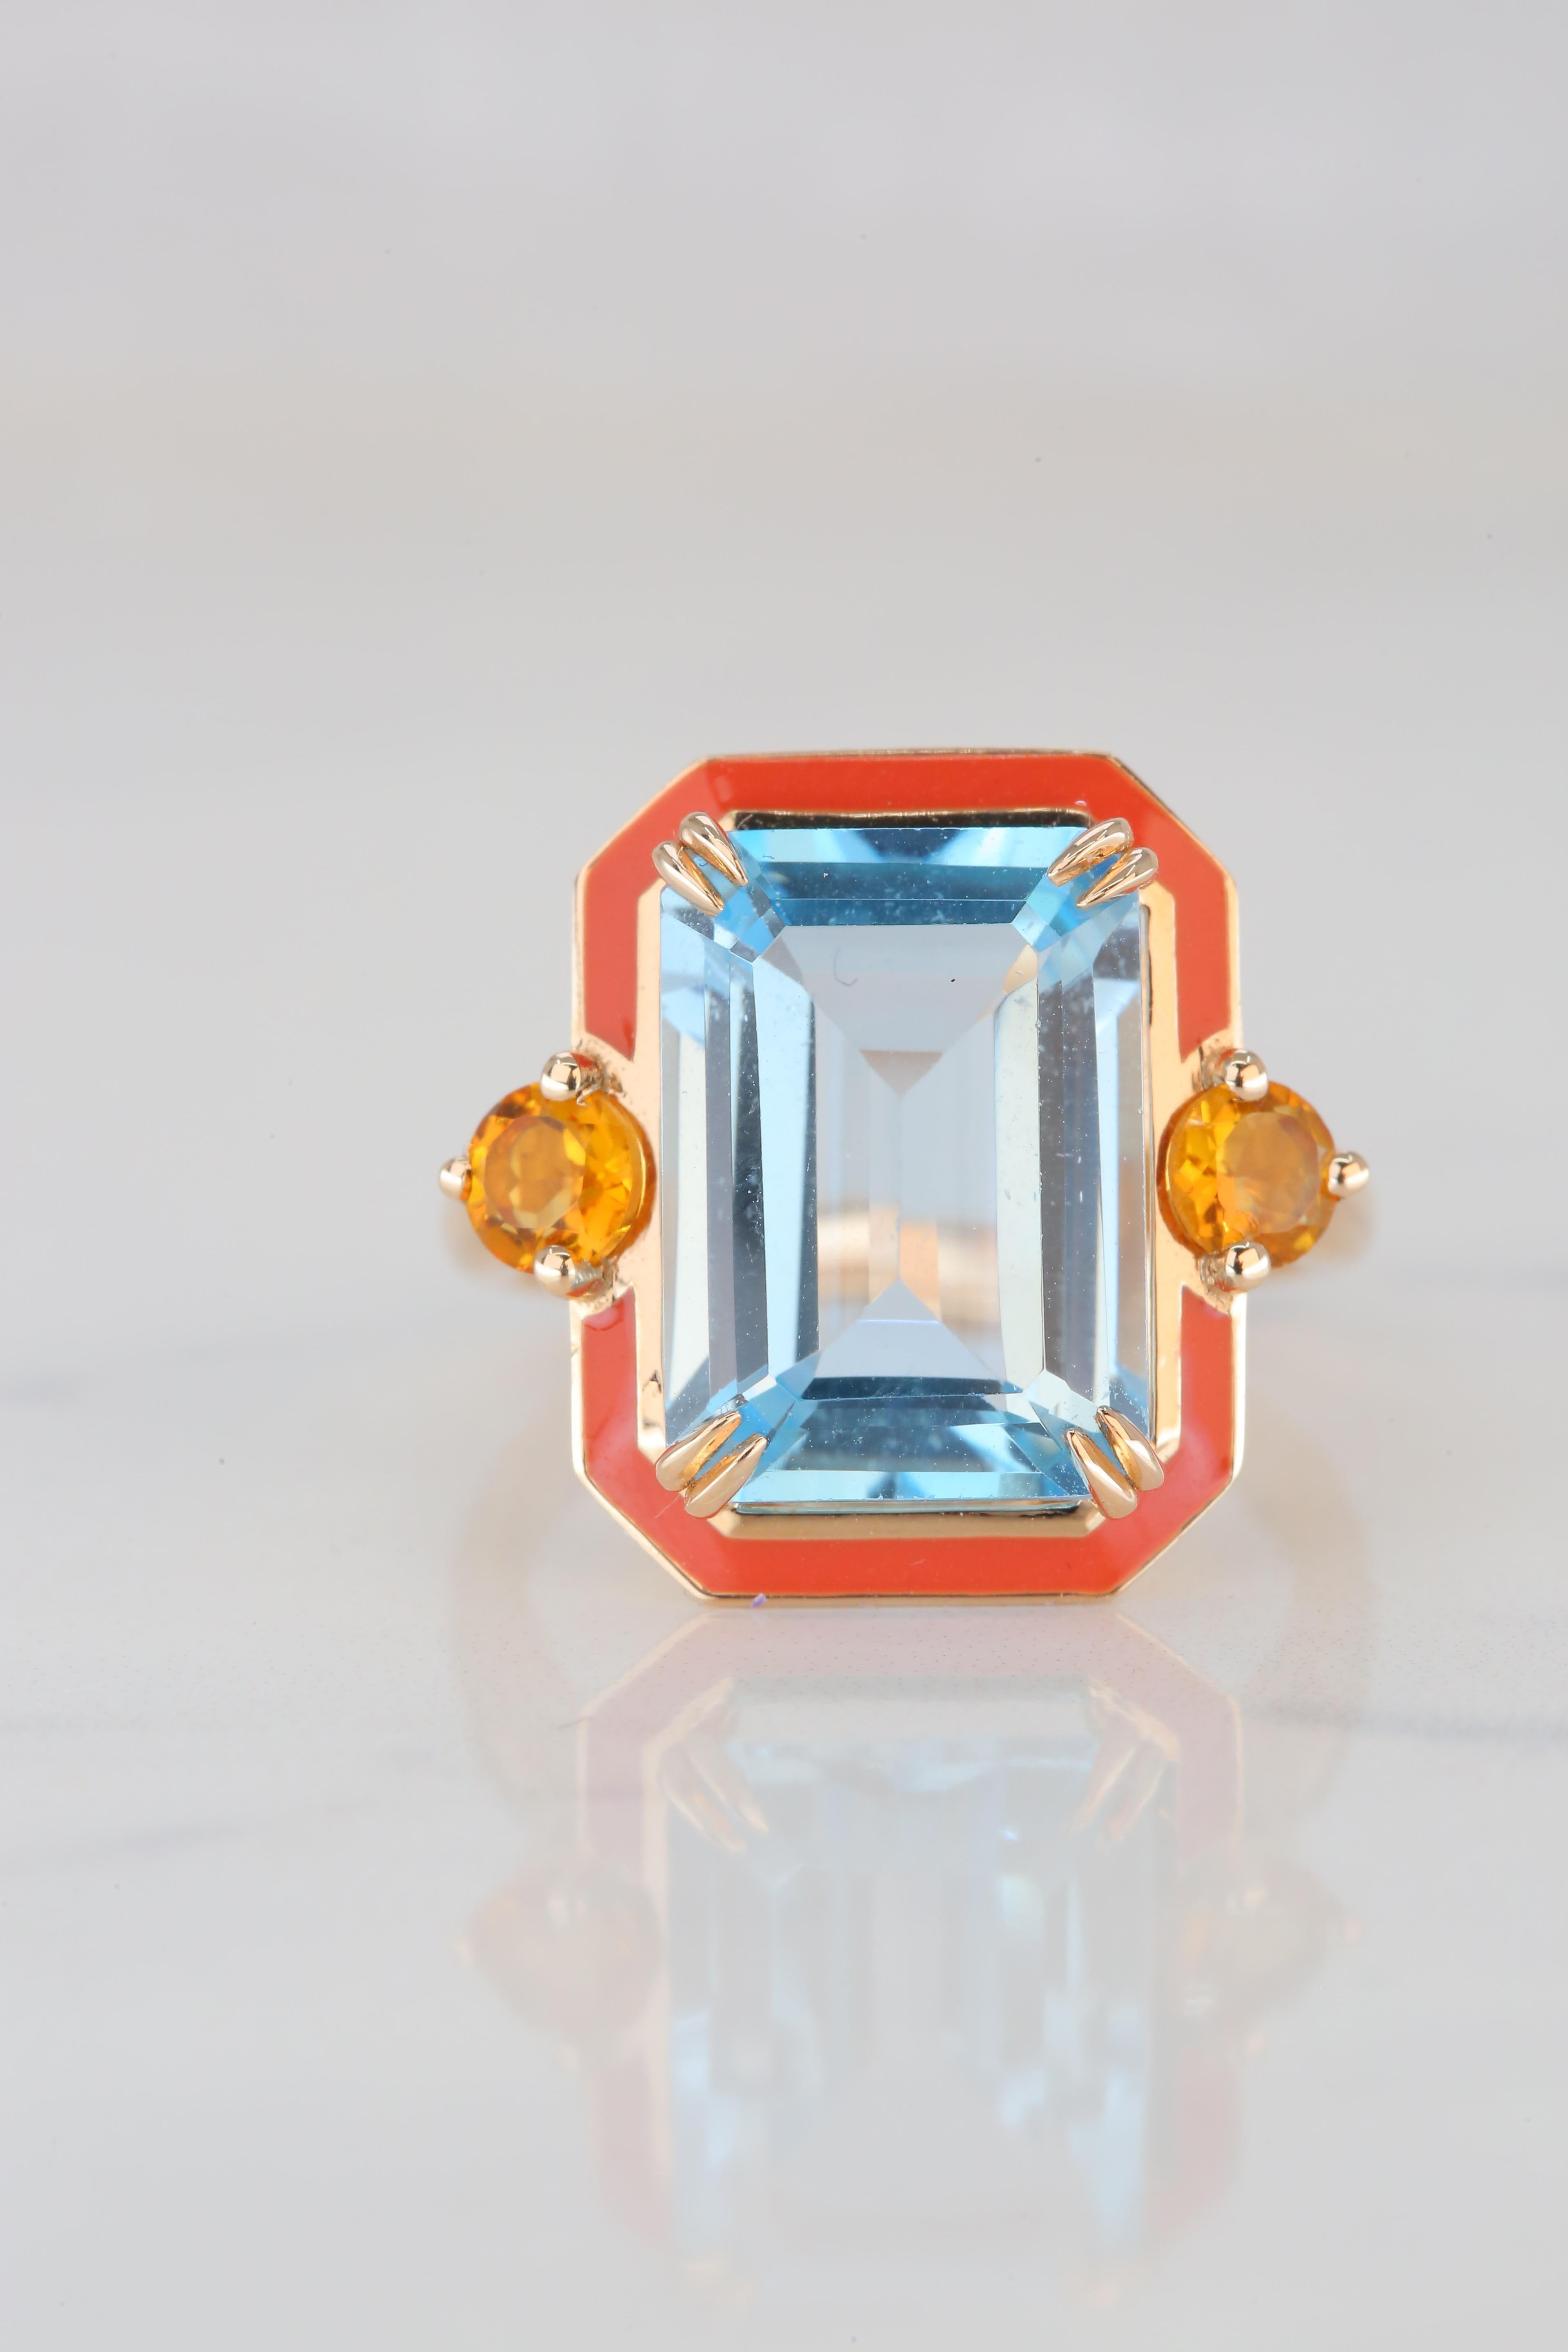 For Sale:  14K Gold Artdeco Style Enameled Cocktail Ring with 5.68 Ct Sky Topaz and Citrine 10